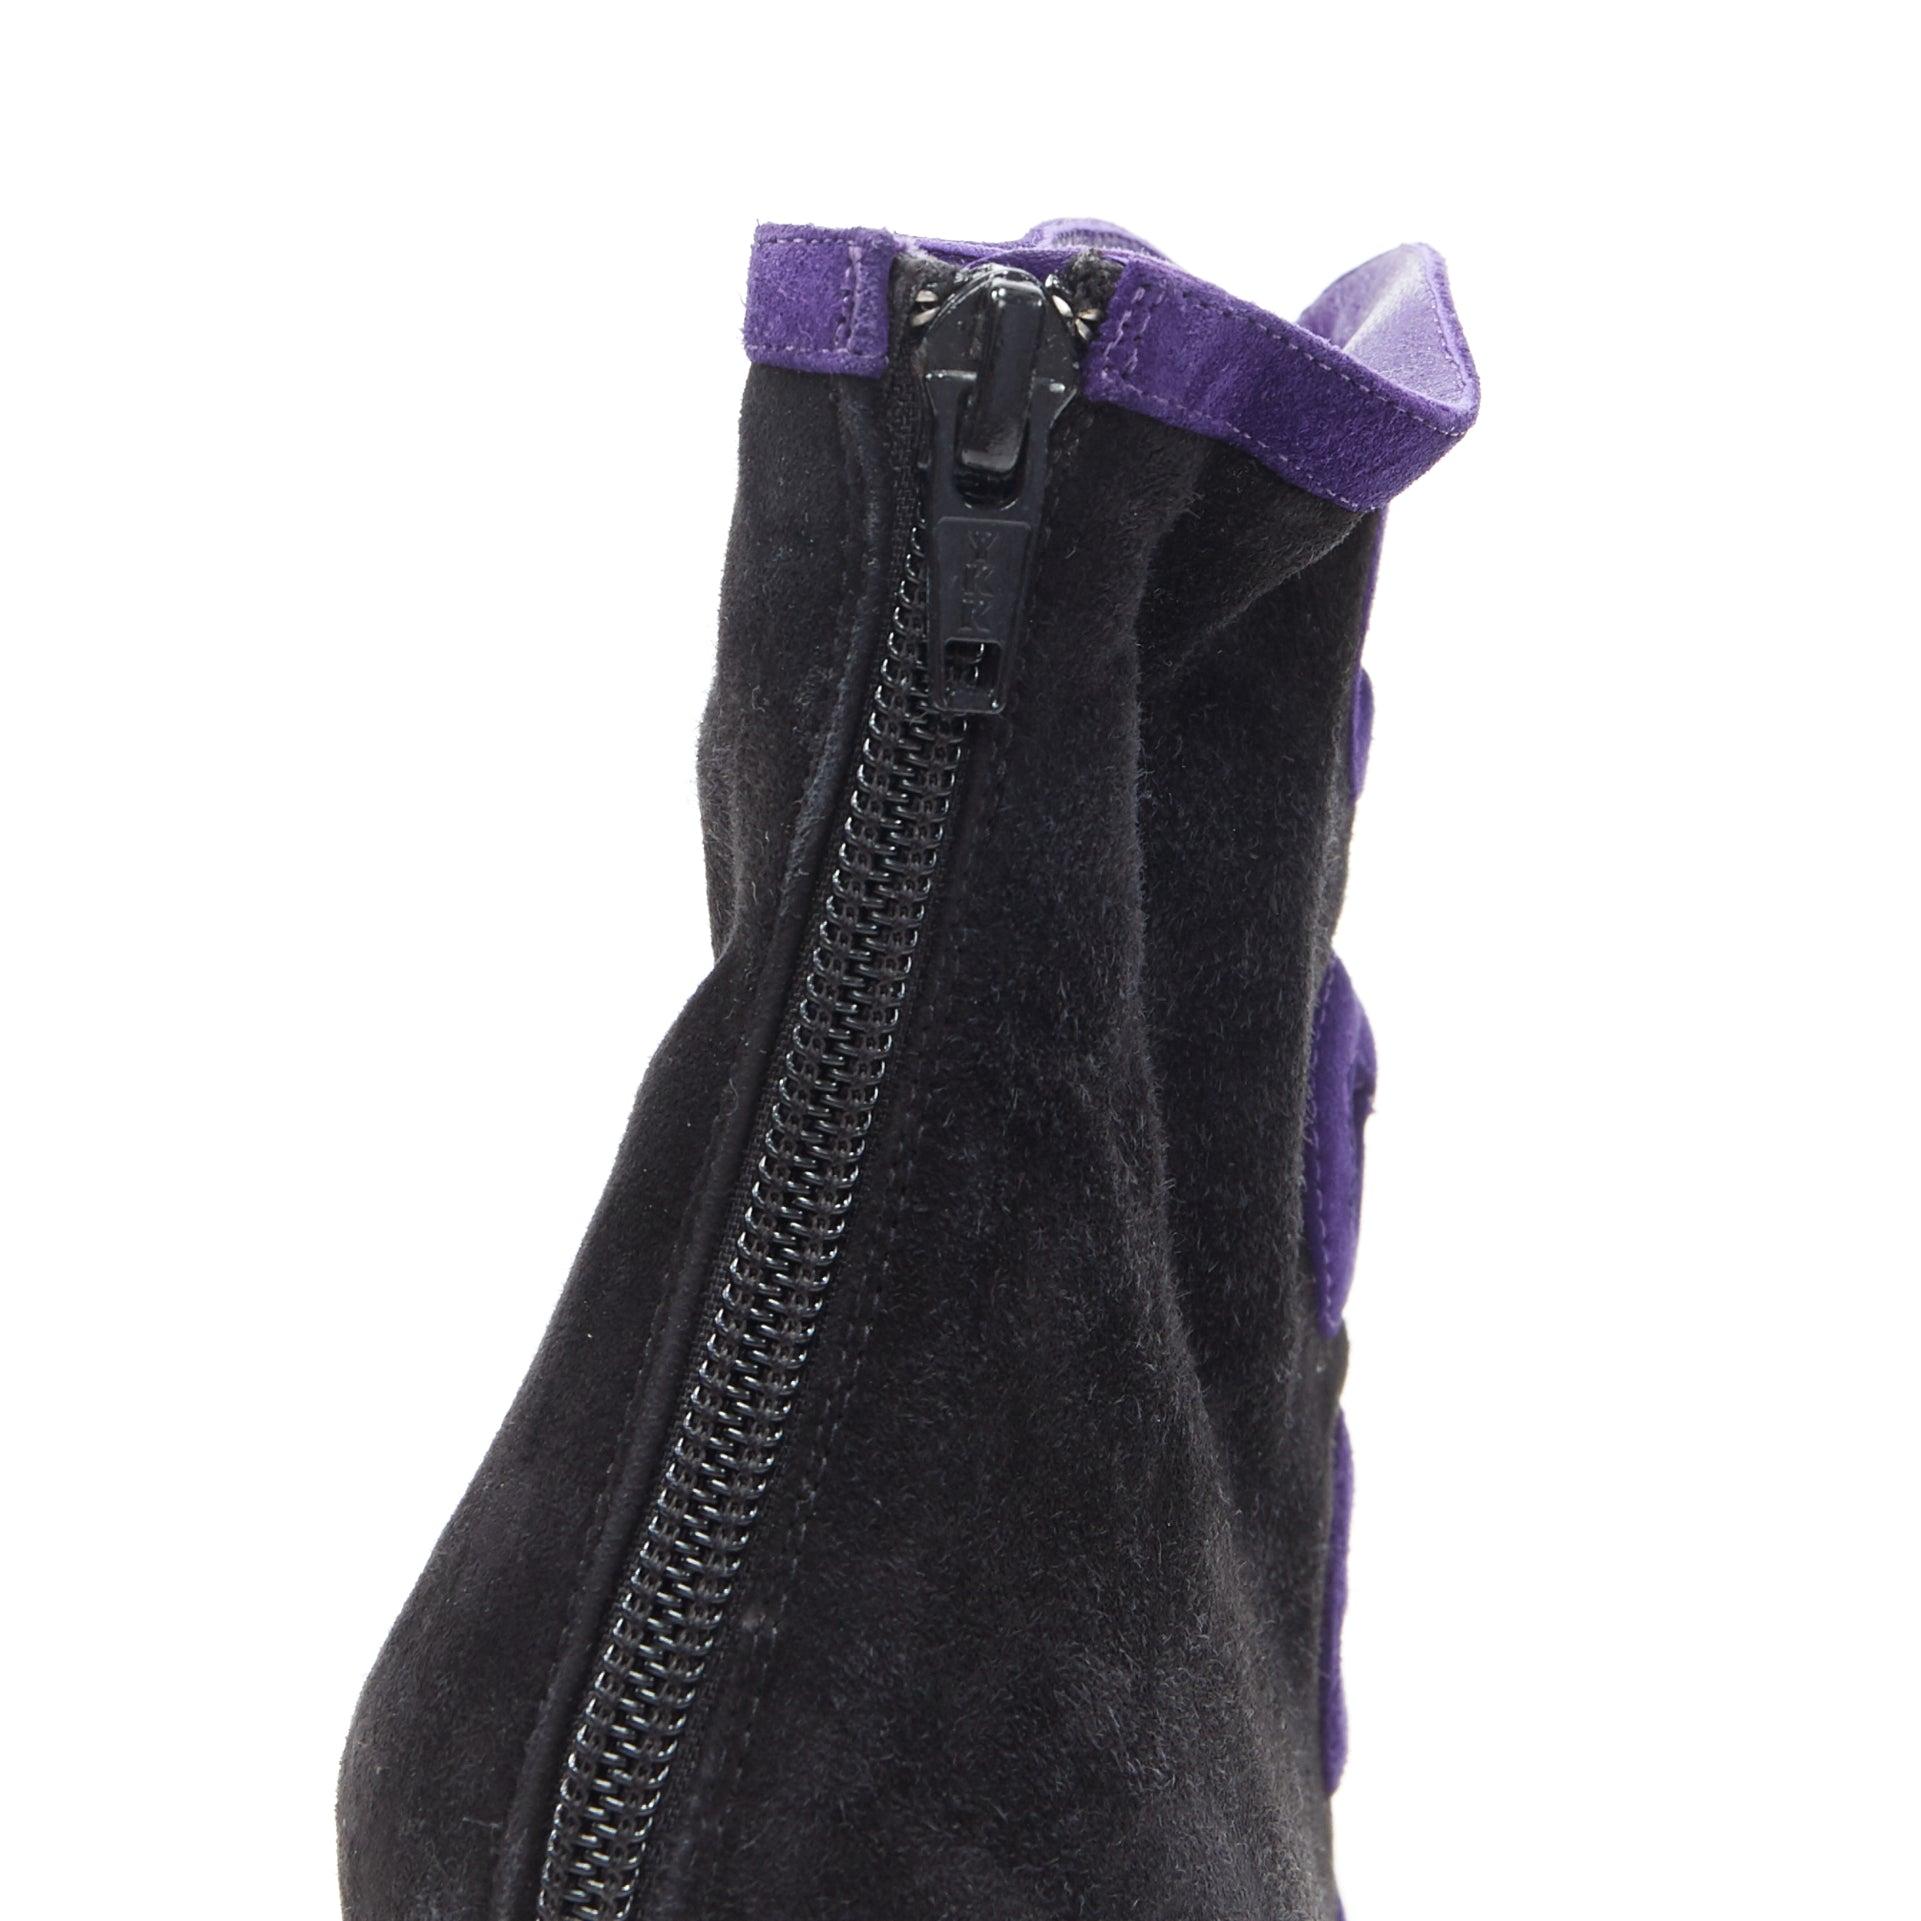 CHRISTIAN LOUBOUTIN black suede purple swirl cut out high heel ankle bootie EU36 For Sale 4